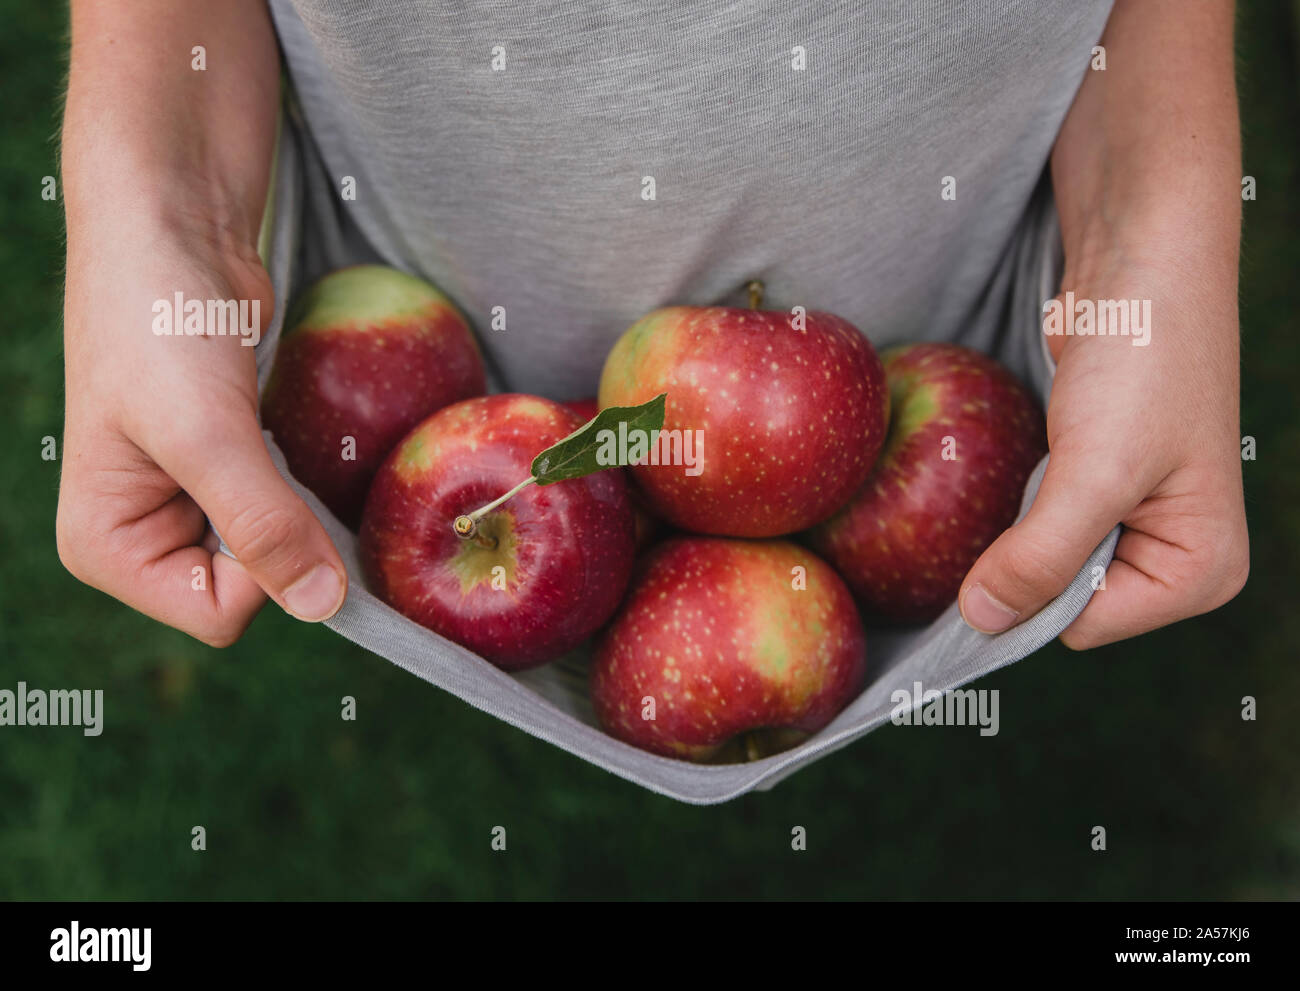 Close up of hands holding edge of shirt that is filled with apples. Stock Photo